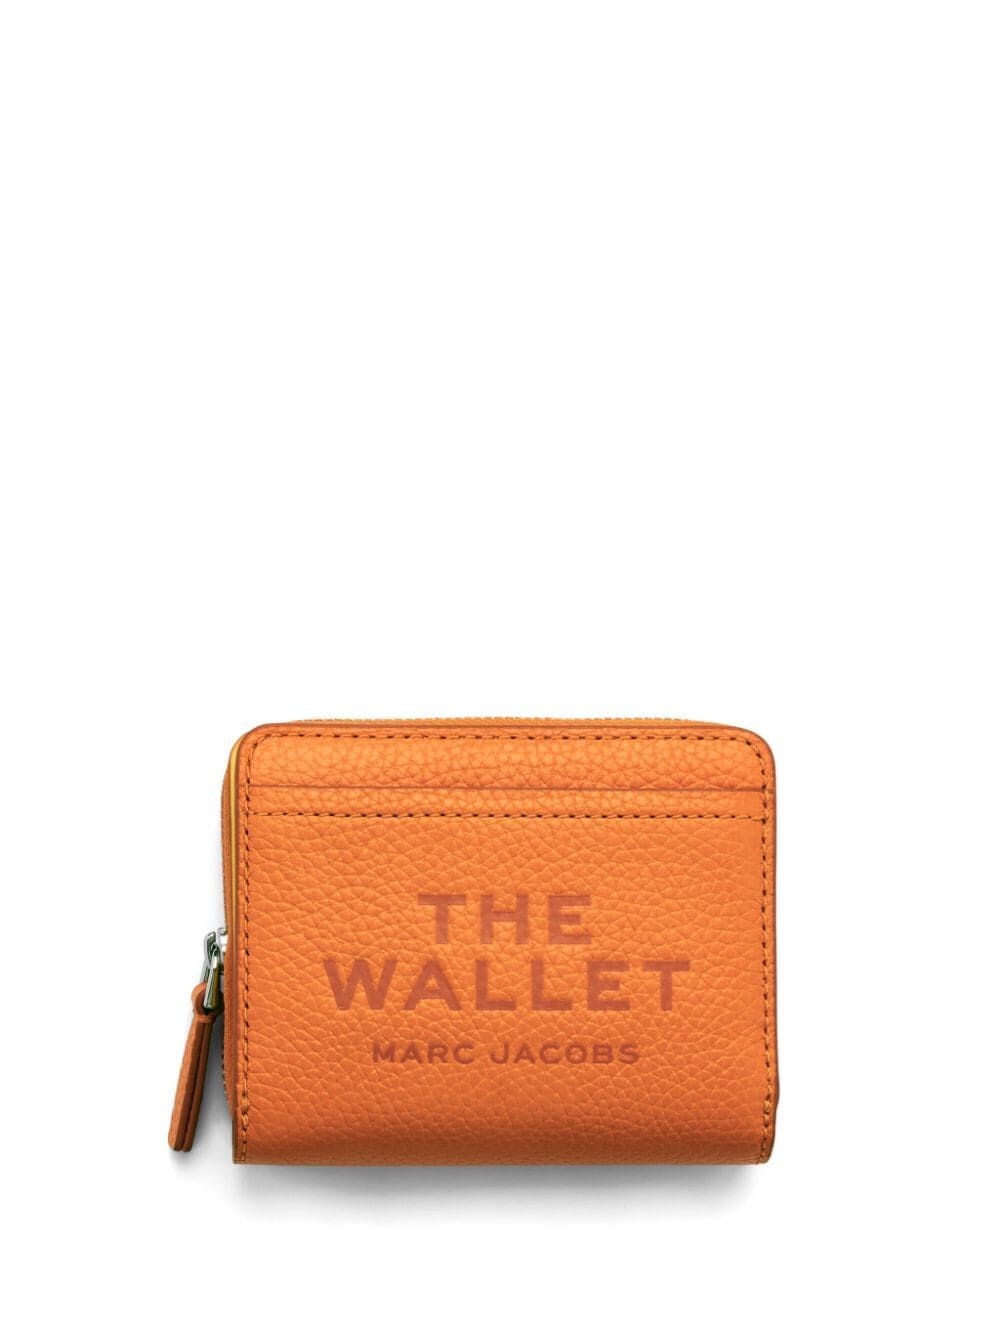 Marc Jacobs The Mini Compact Wallet In Orange